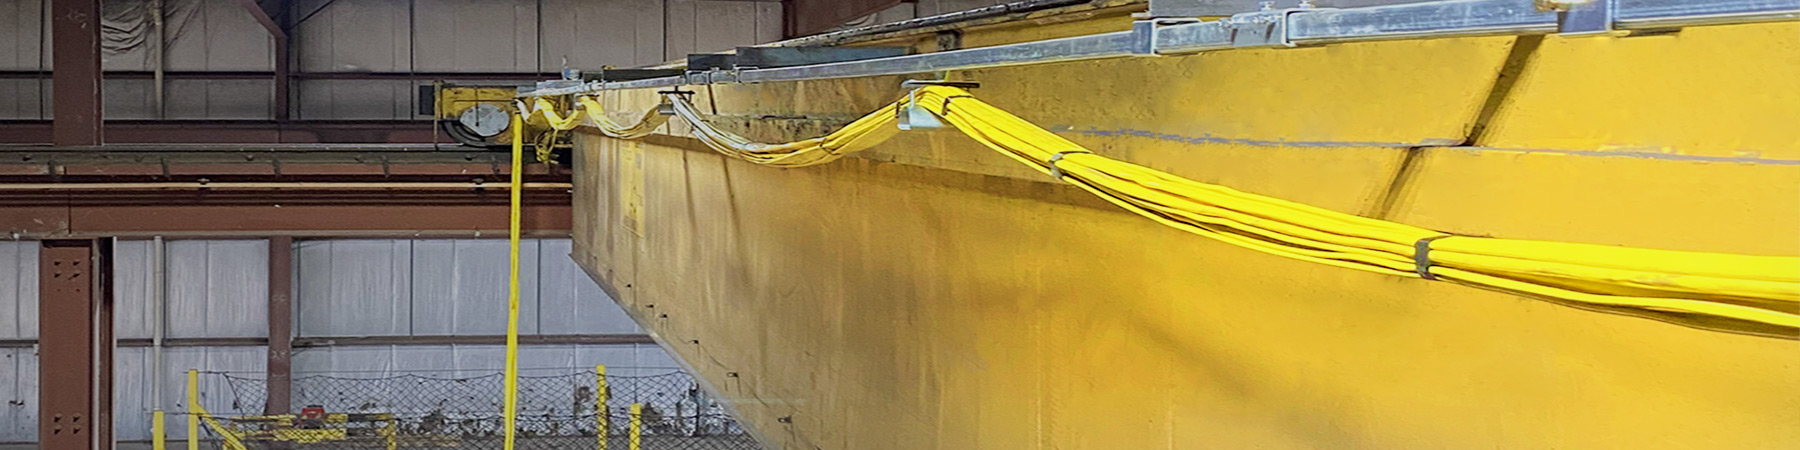 Newly installed flat cable festoon and c-track for 40 ton overhead bridge crane.